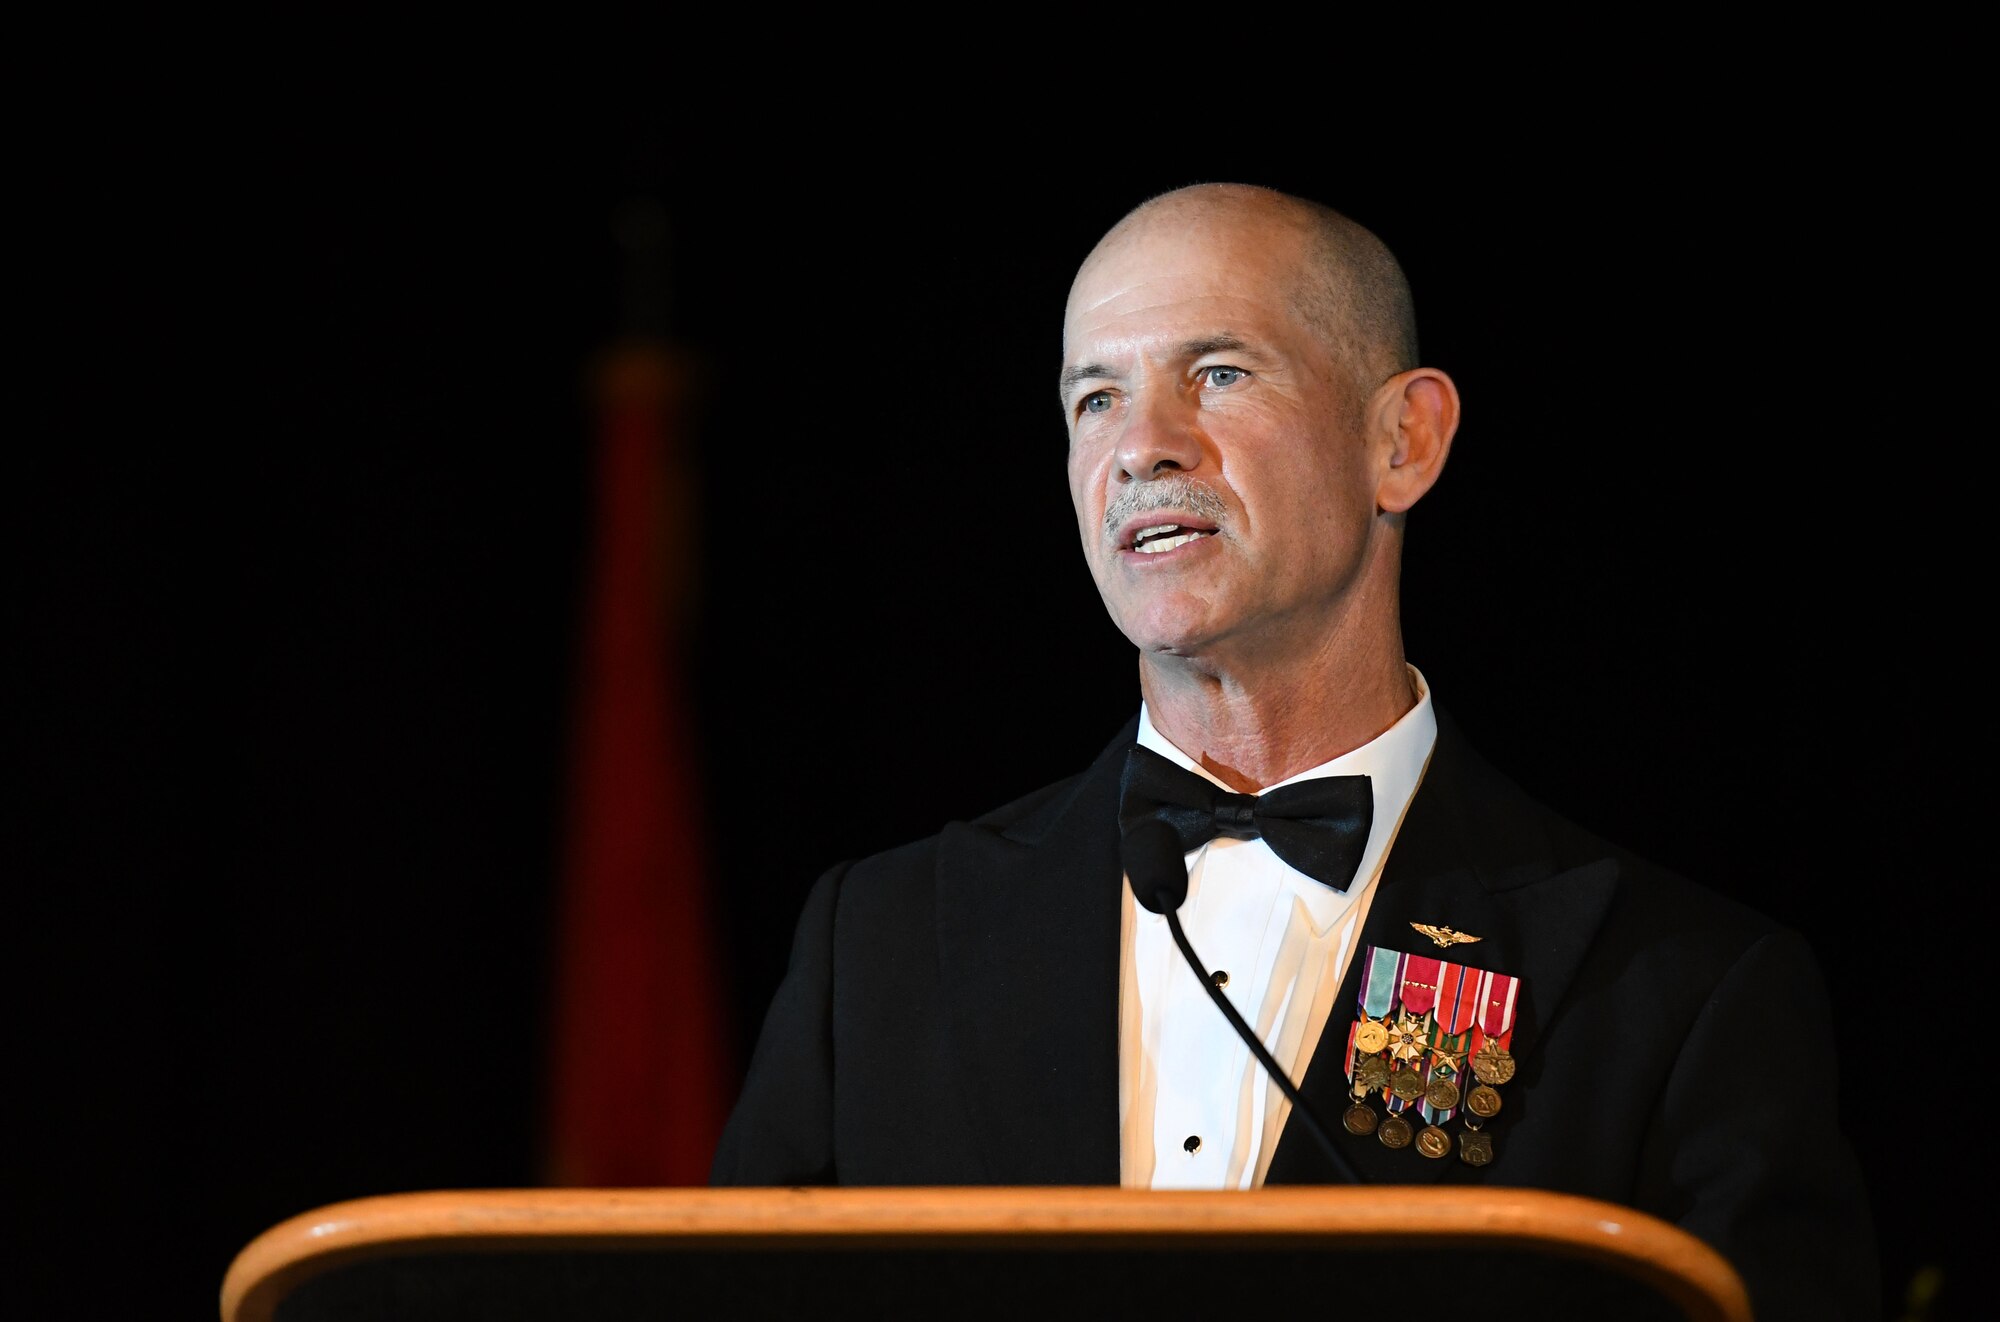 U.S. Coast Guard Admiral Charles Ray, U.S. Coast Guard vice commandant, delivers remarks during the 40th Annual Salute to the Military inside the Mississippi Coast Convention Center, in Biloxi, Mississippi, Oct. 16, 2018. The Salute to the Military event recognized the men and women who serve in the military along the Gulf Coast. (U.S. Air Force photo by Kemberly Groue)